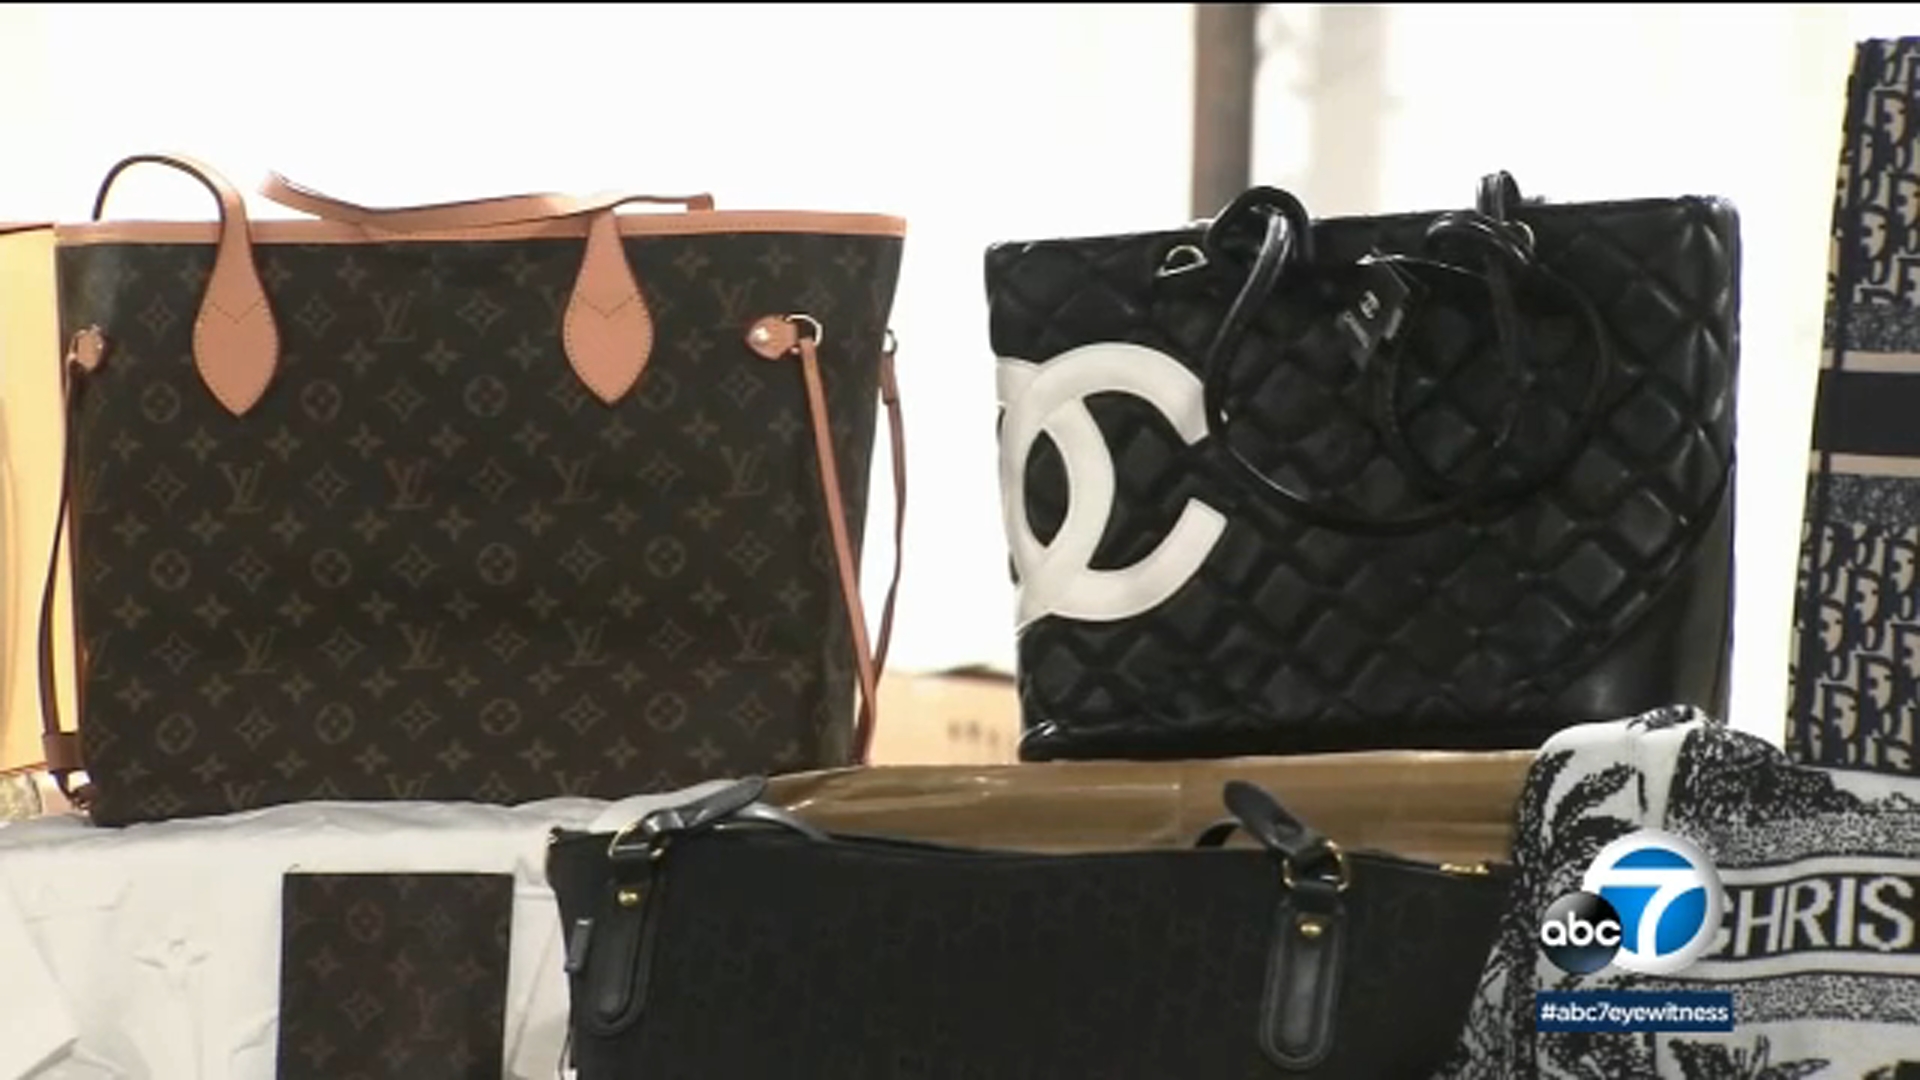 Customs officers seize more than $700,000 worth of counterfeit